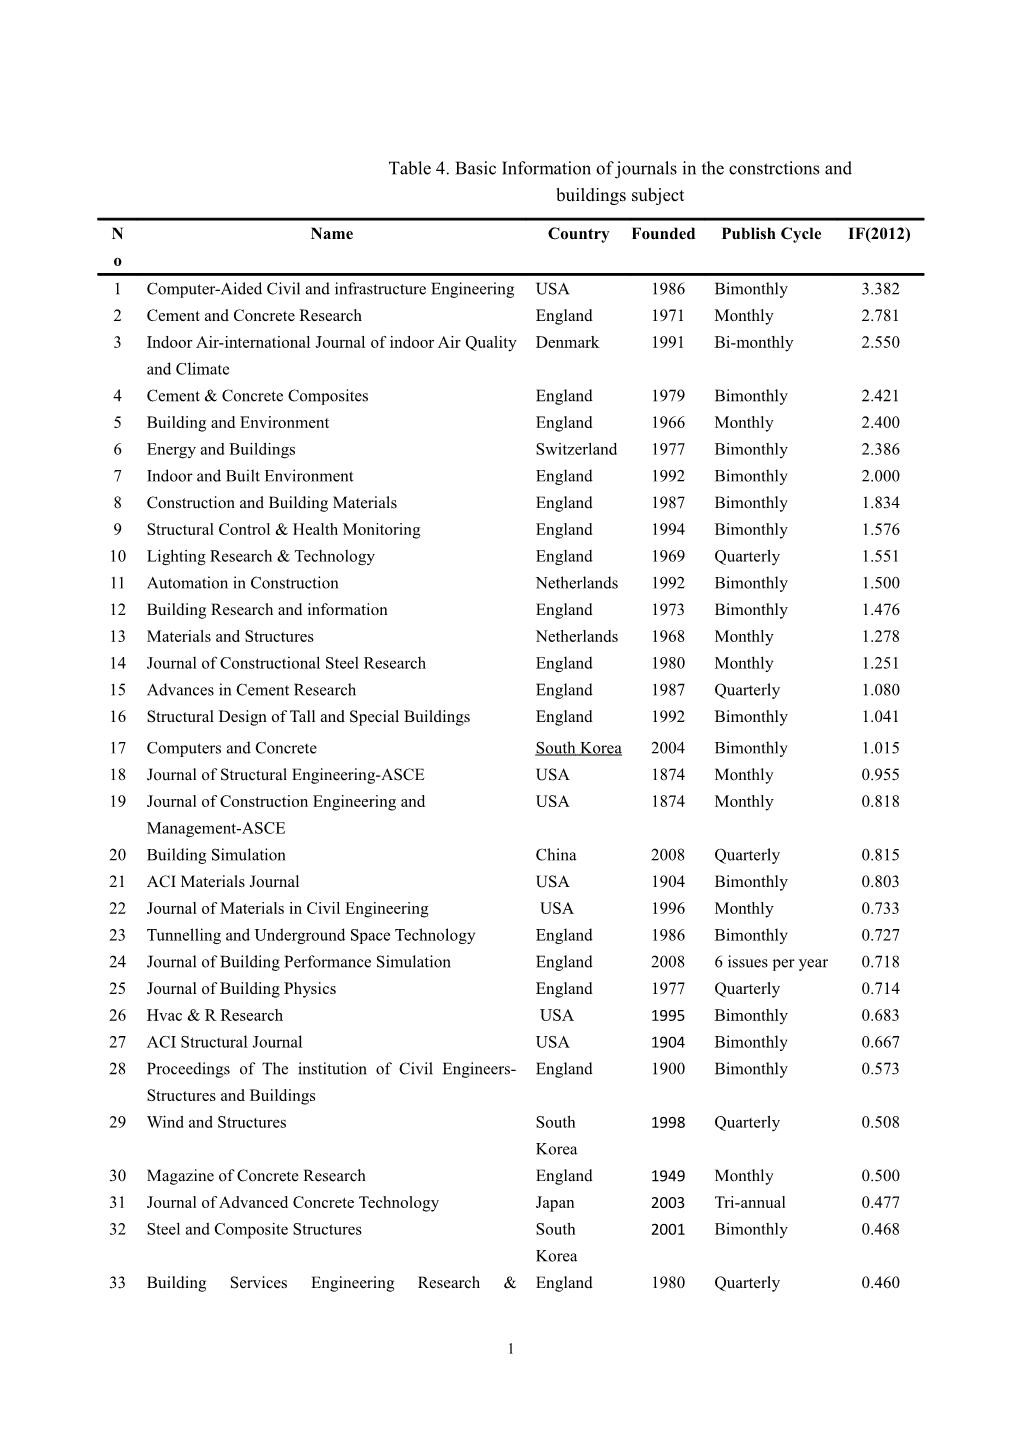 Table 4. Basic Information of Journals in the Constrctions and Buildings Subject